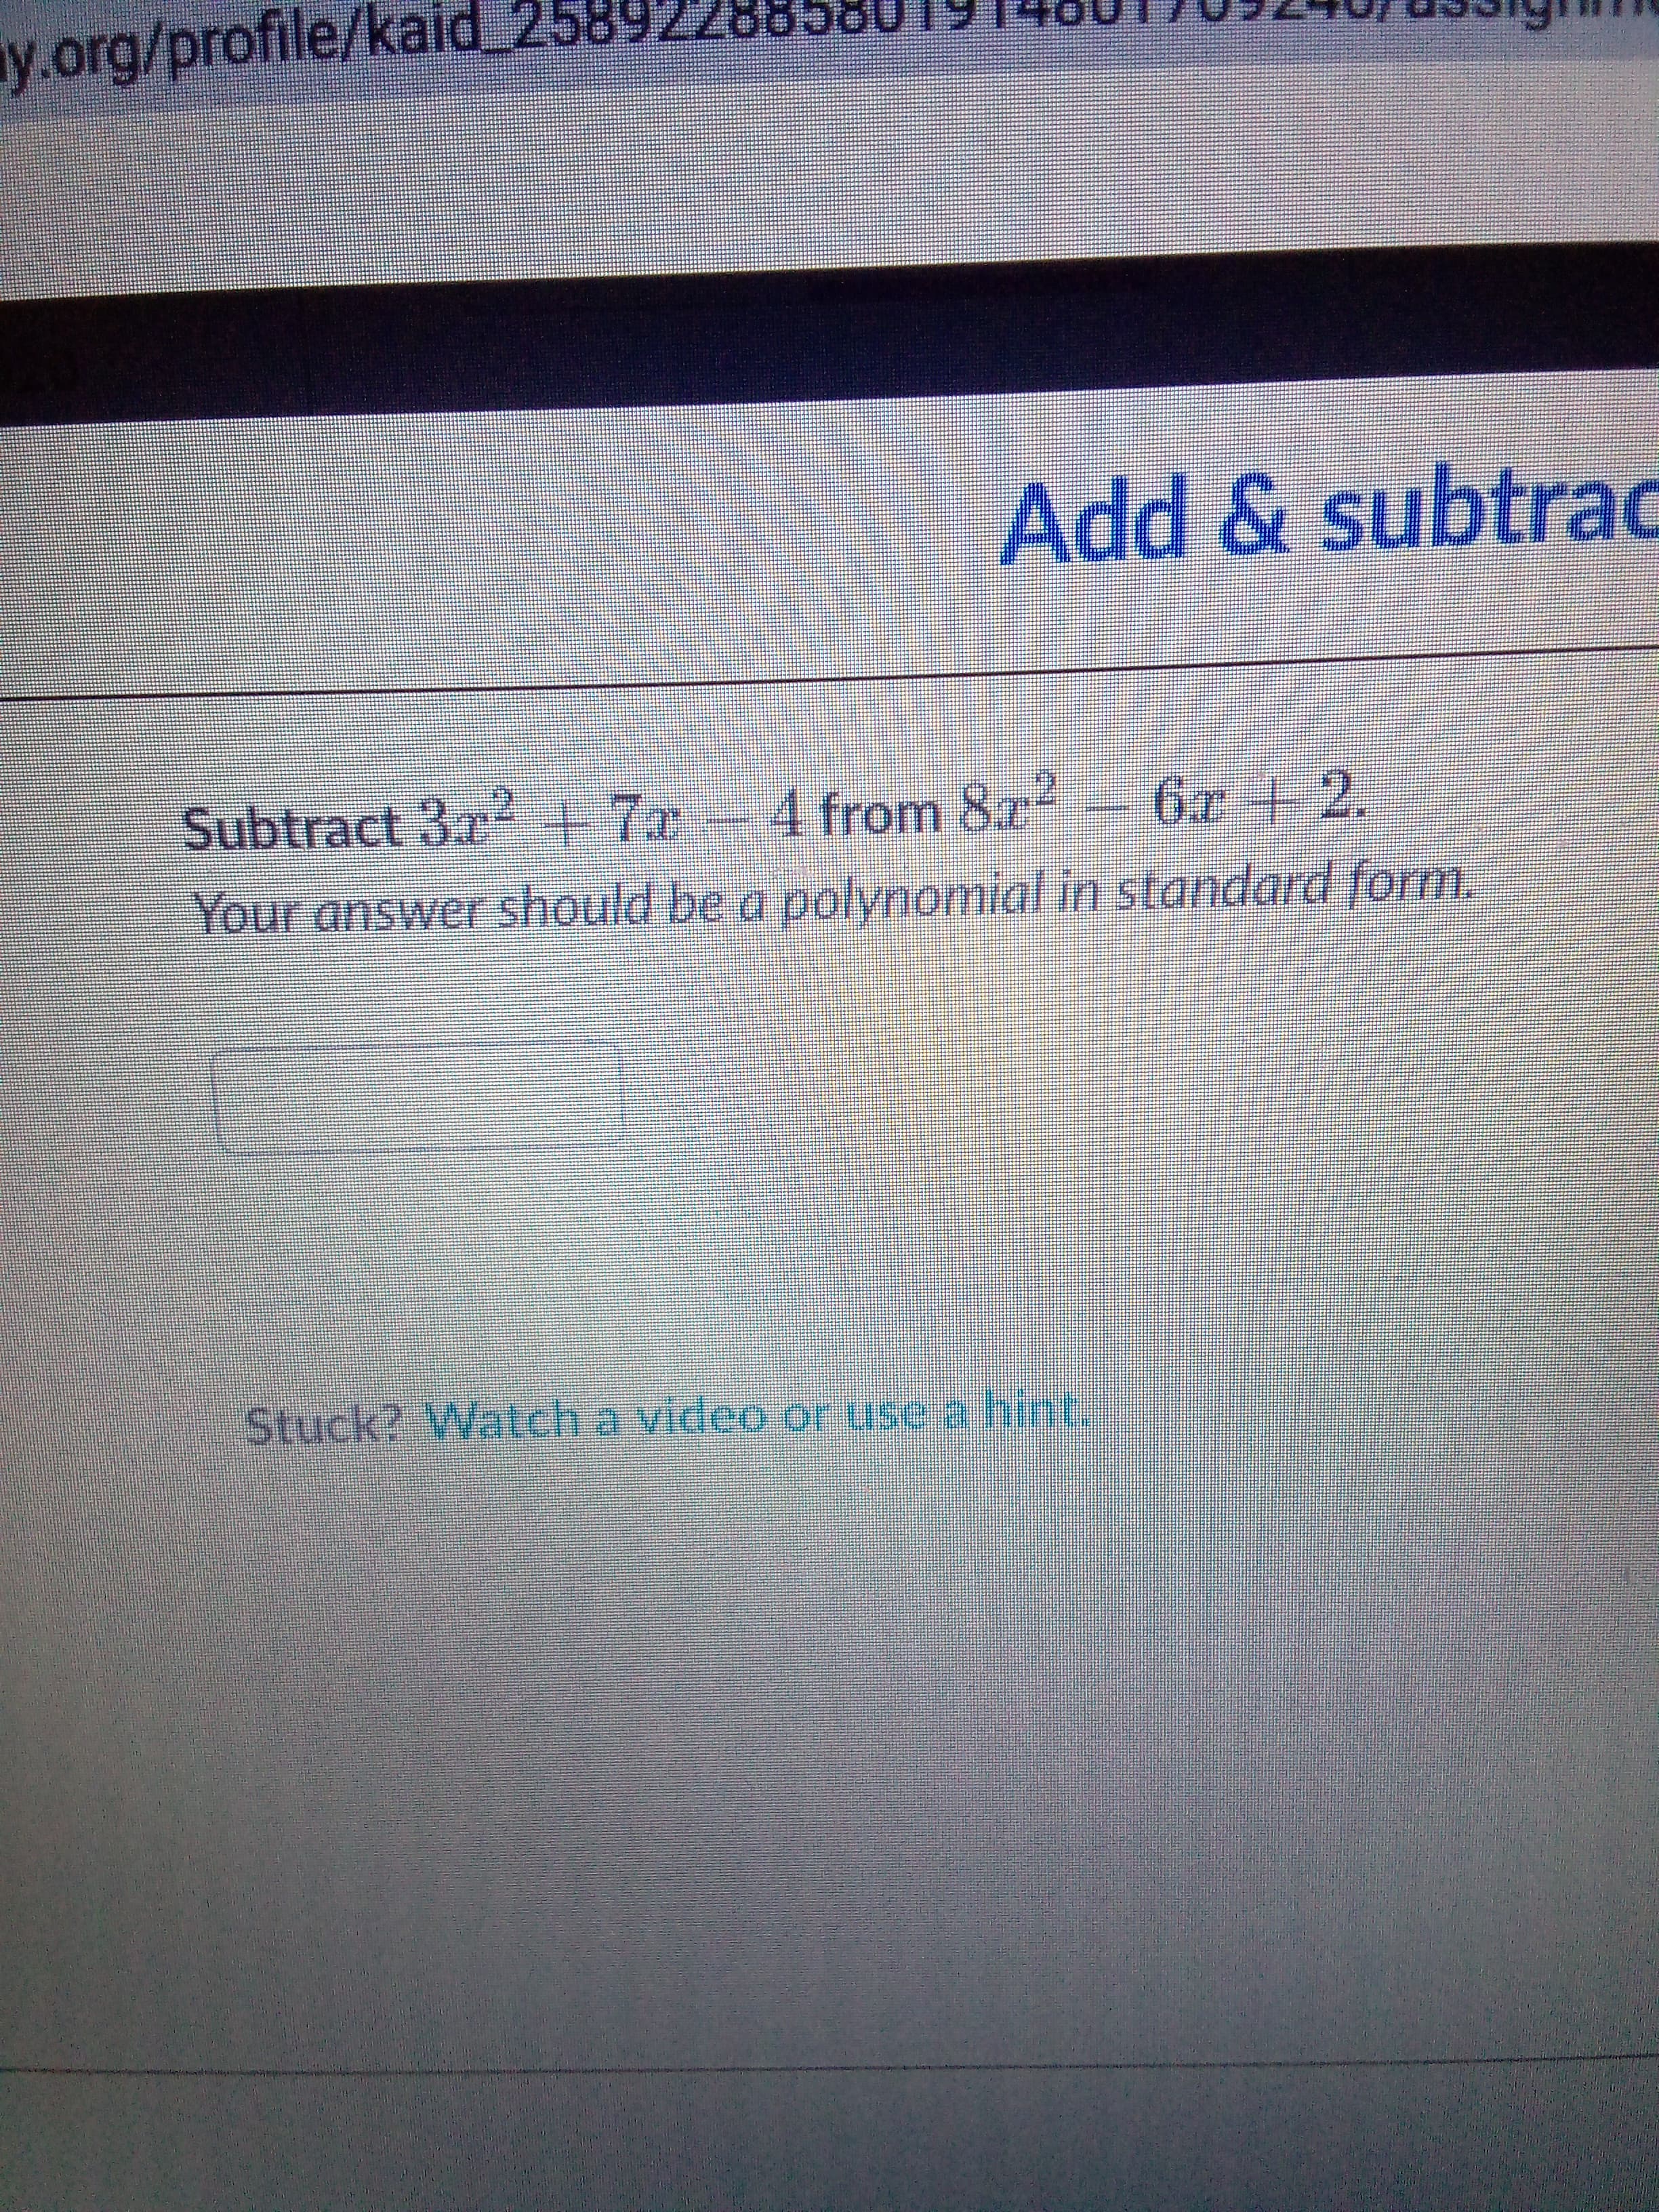 4 from 8.2?
Your answer should be a polynomial in standard form,
Subtract 3c2+7r
x-
6r +2.
1.
